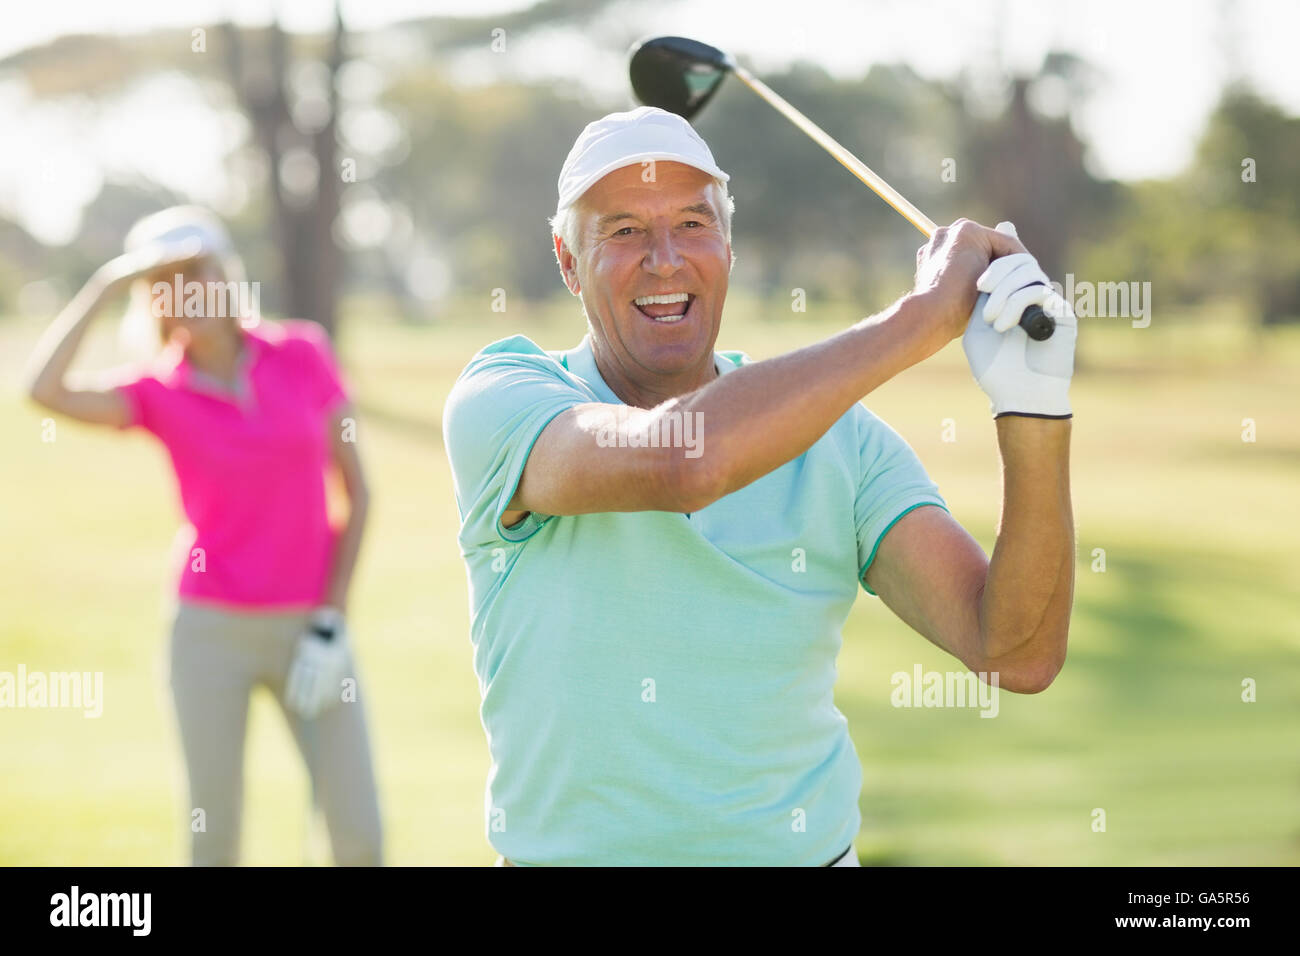 Portrait of cheerful mature golfer holding golf club Banque D'Images